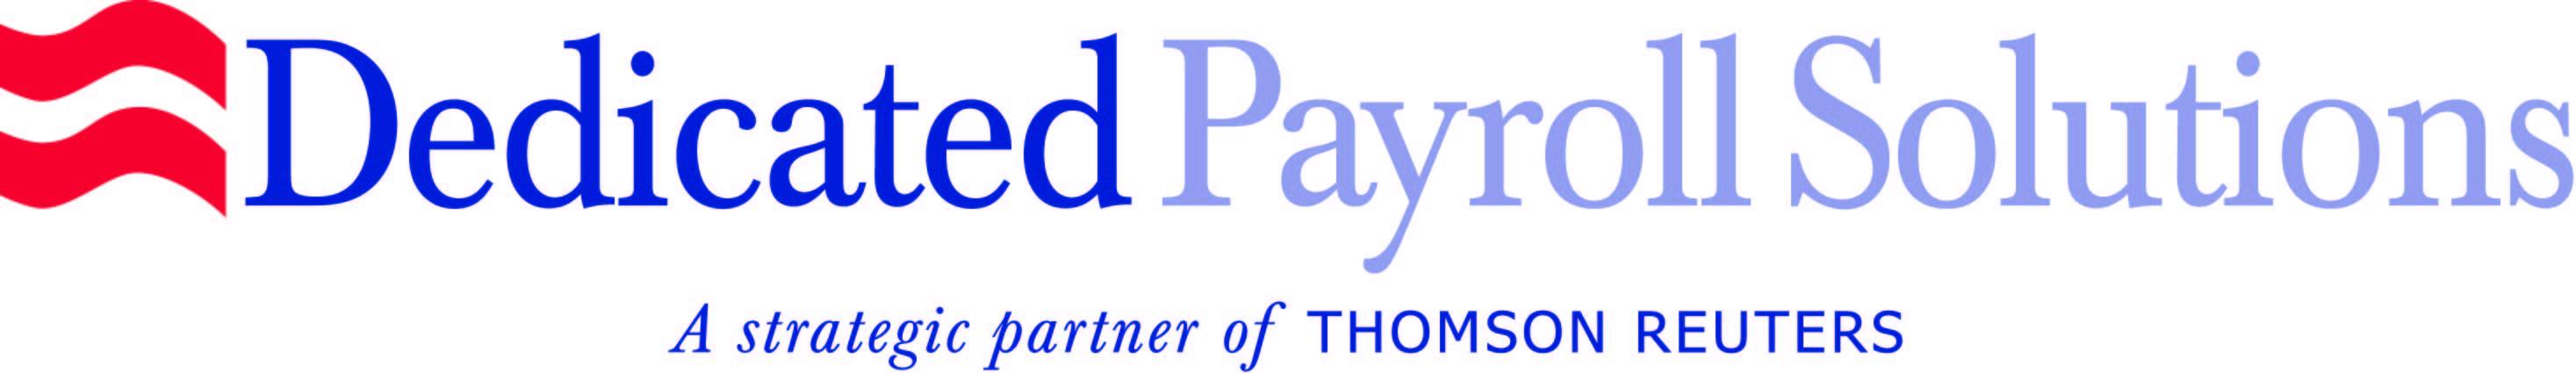 Dedicated Payroll Solutions